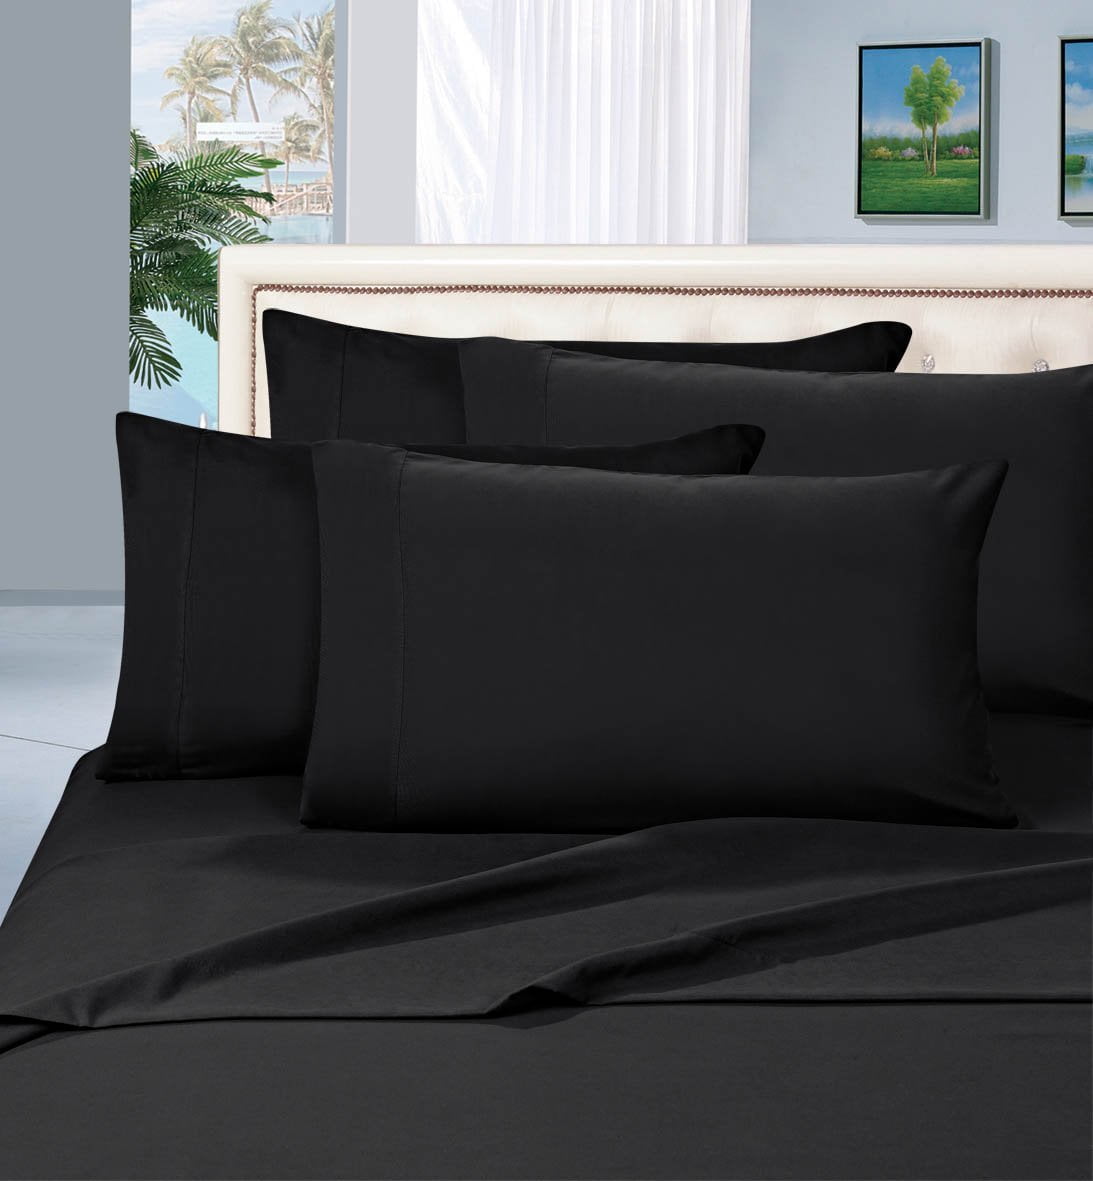 Sfoothome Queen Flat Sheet Black Top Sheet Luxury and Soft 1500 Thread Count Quality Bedding Flat Sheet Premium Hotel 1-Piece Stain-Resistant Wrinkle-Free